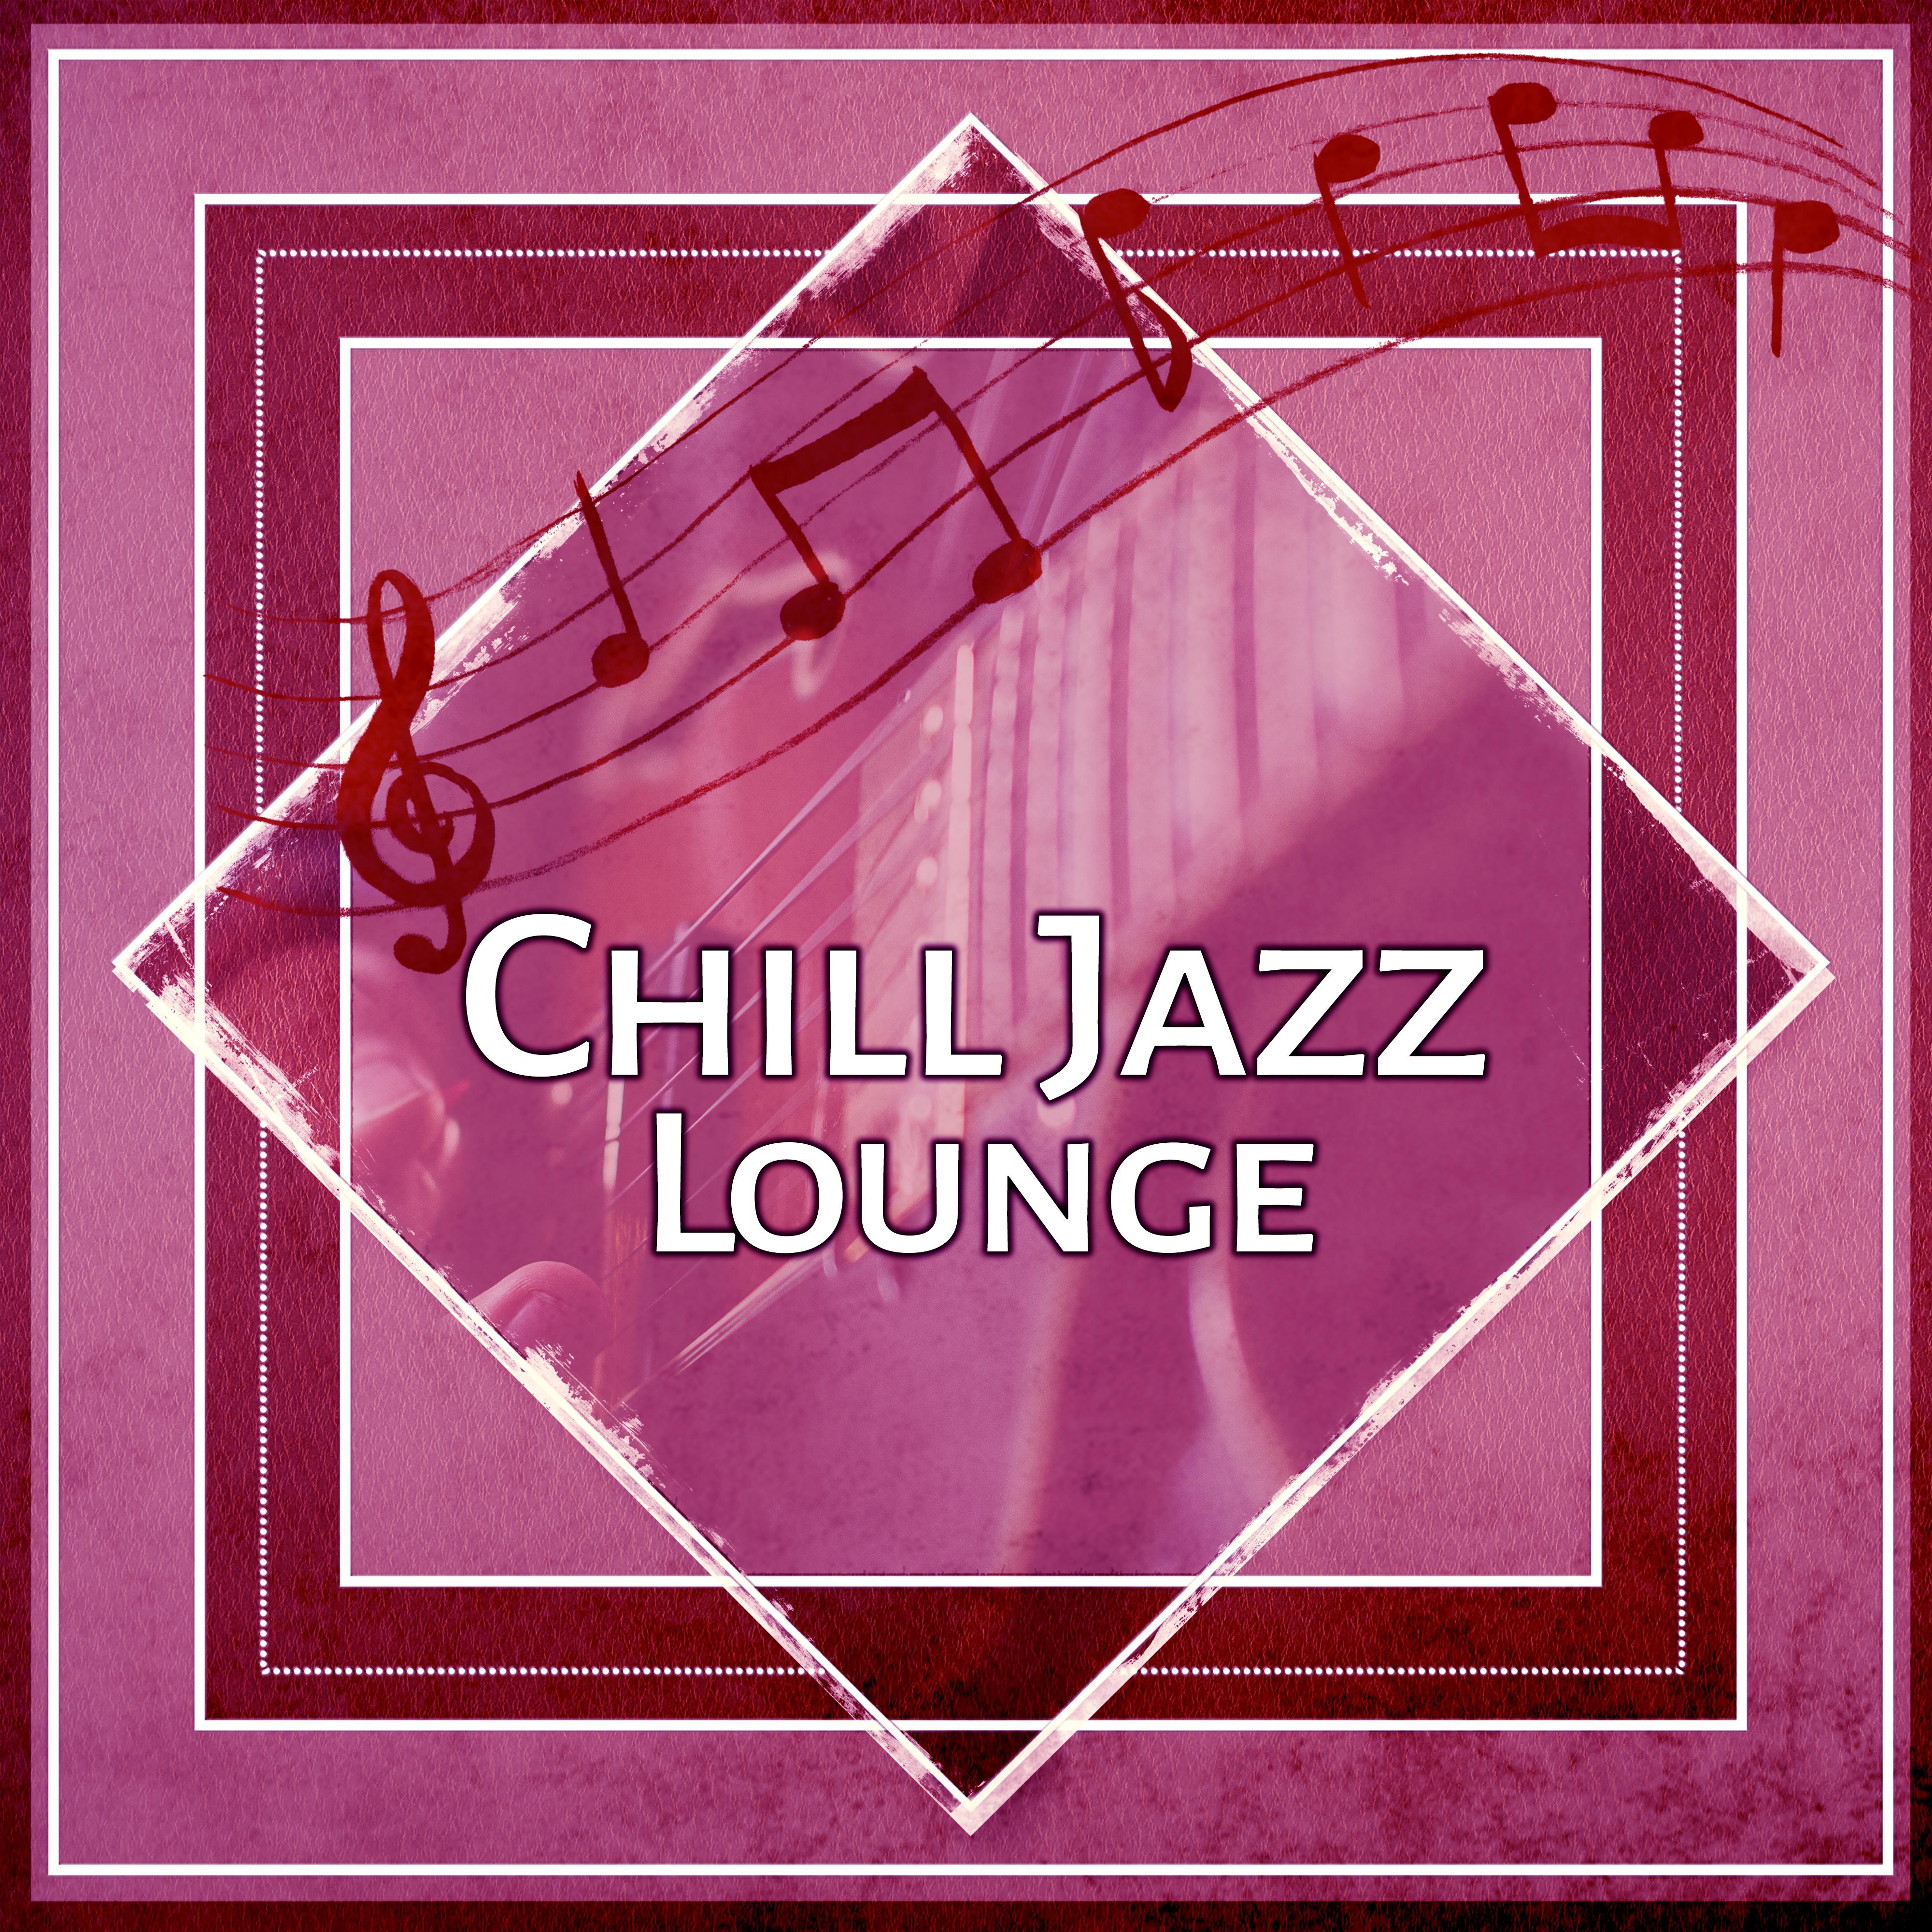 Chill Jazz Lounge  Smooth Jazz Lounge, Piano Bar, Mellow Jazz, Best Restaurant Music, Dinner Party Time